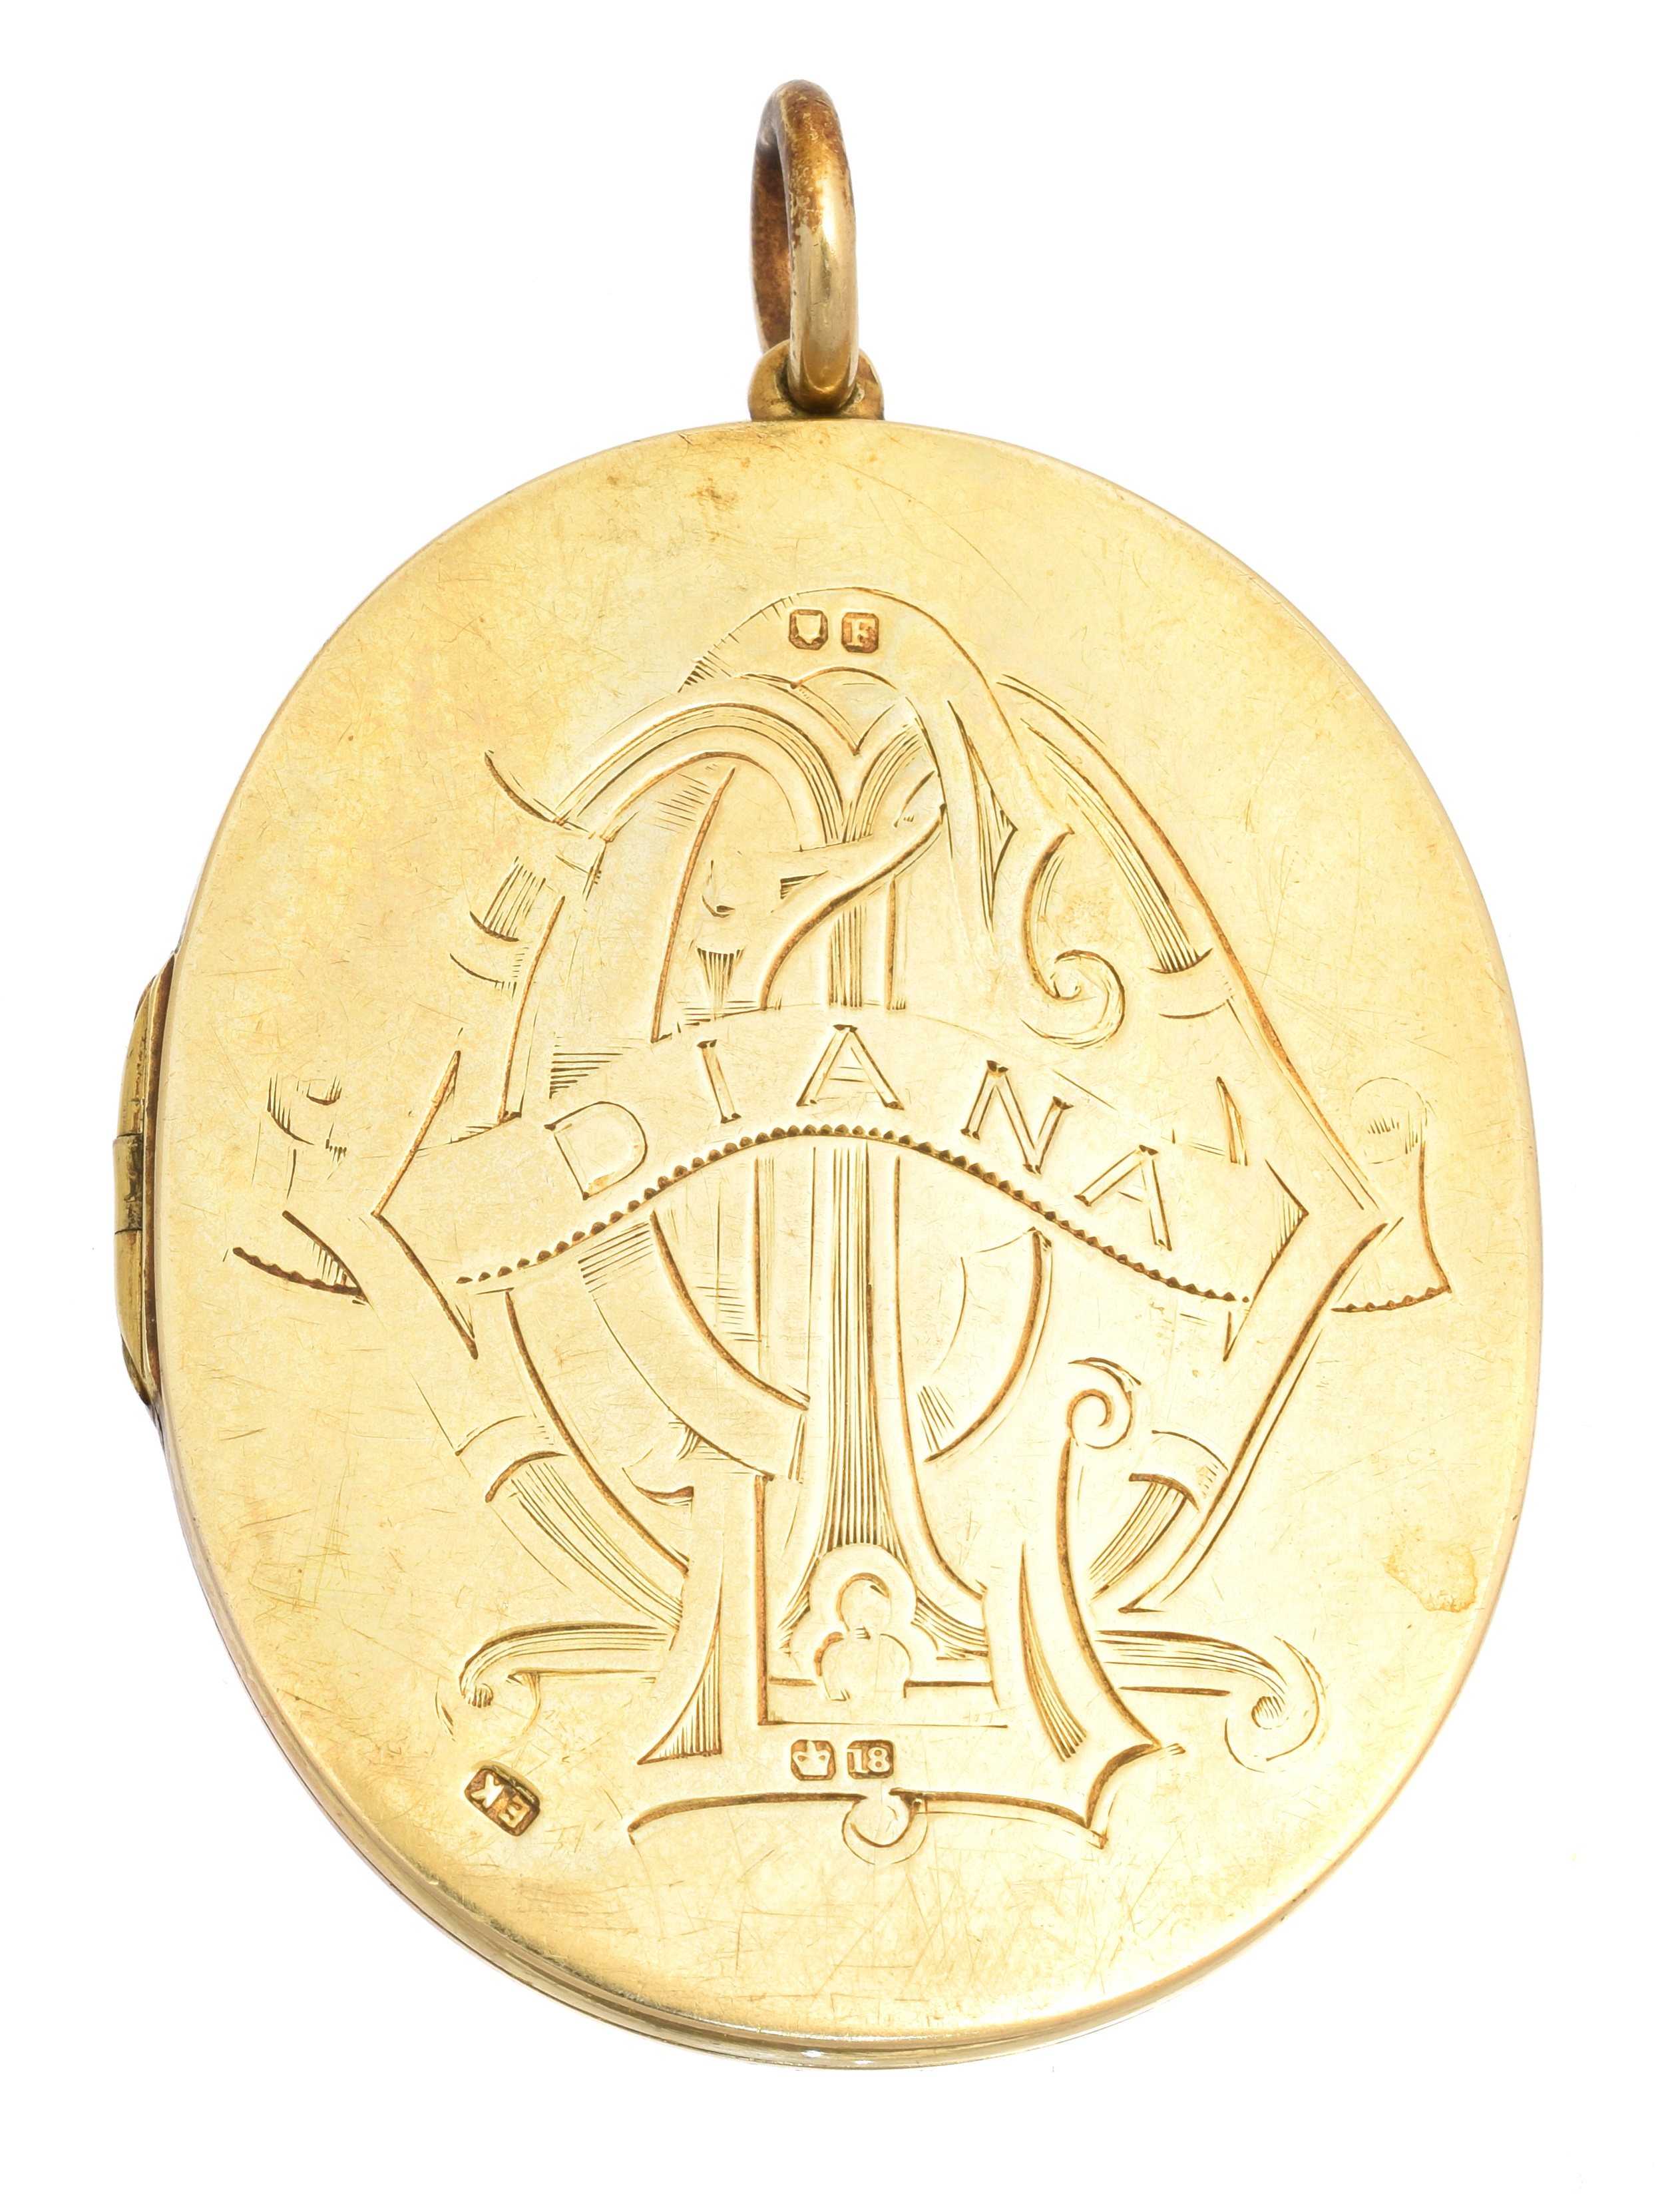 A late Victorian 18ct gold photograph miniature locket, the oval shape hinged locket with engraved with monogram, cartouche and 'Diana' to front, and coat of arms to reverse, the locket opening to reveal a photograph miniature of Diana Caroline Walpole, with inscription reading 'Diana Caroline 2nd daughter and co-heiress of Reginald Robert Walpole, great grandson of Horatio 1st Lord Walpole of Walterton and great great grandson (maternally) of Sir Edward Seymour 8th Duke of Somerset. married XVIII April MDCCCLXXVI to James Boughey Monk Linguard Monk M.A, Trinity College, Cambridge, only child of Richard Boughey Monk Linguard-Monk of Fulshaw Hall, Wilmslow, Cheshire.' hallmarks for EK, London, 1881, length 6.7cm, gross weight 59.7g.